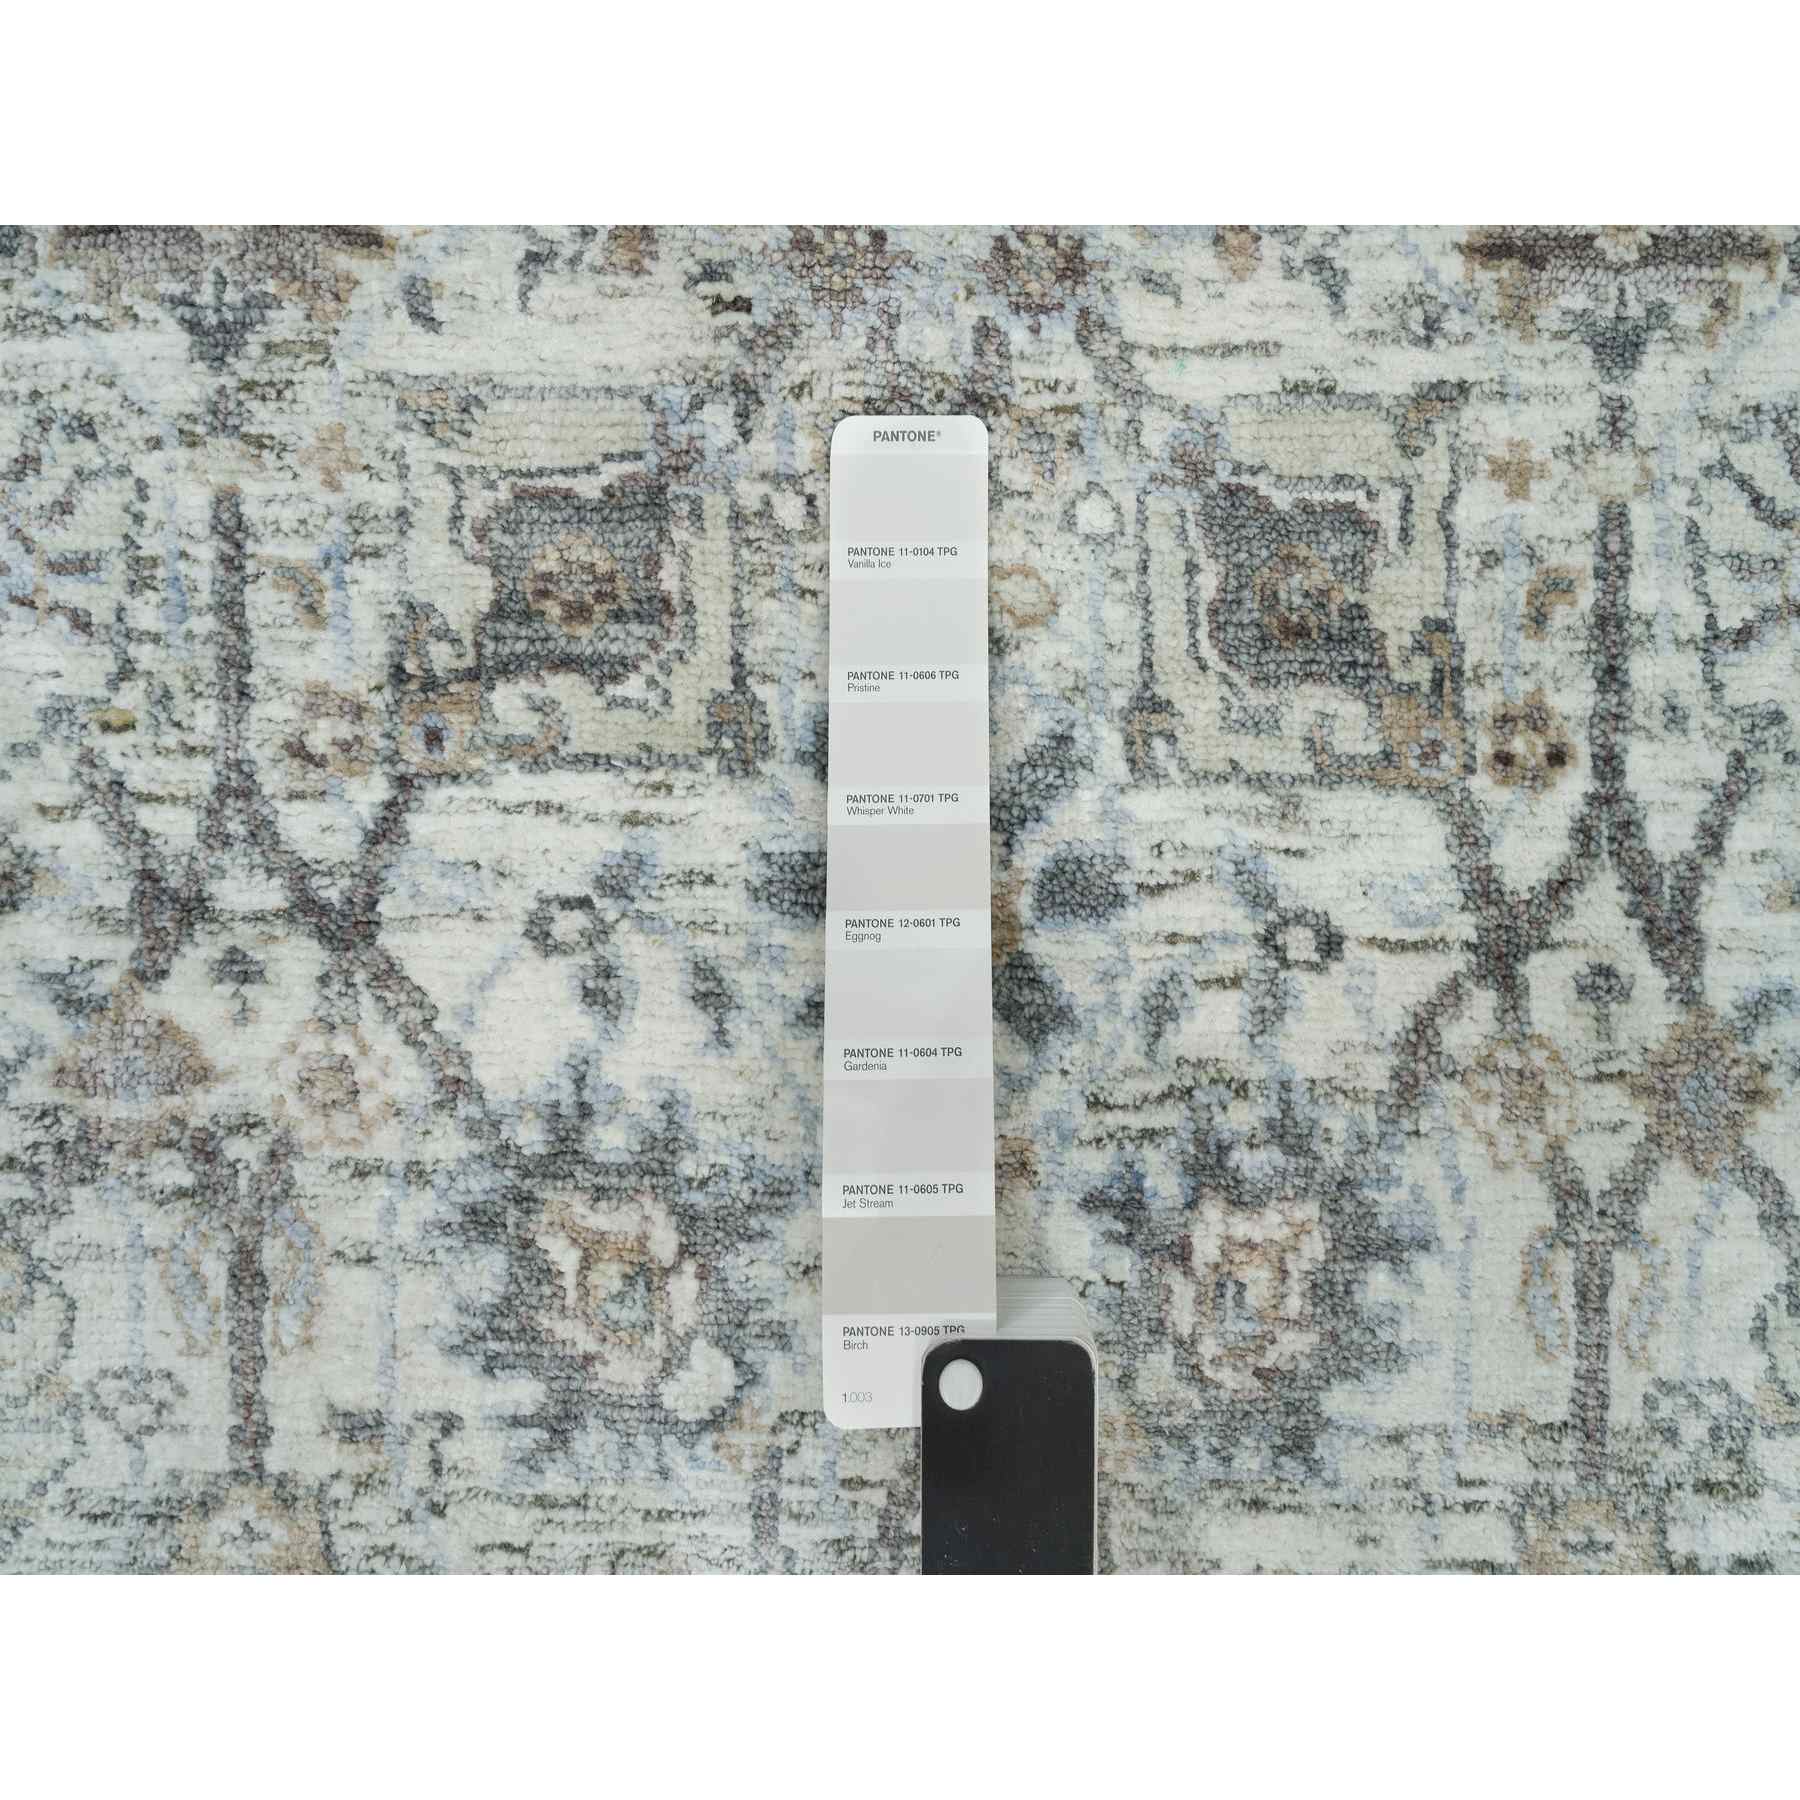 Transitional-Hand-Knotted-Rug-451160